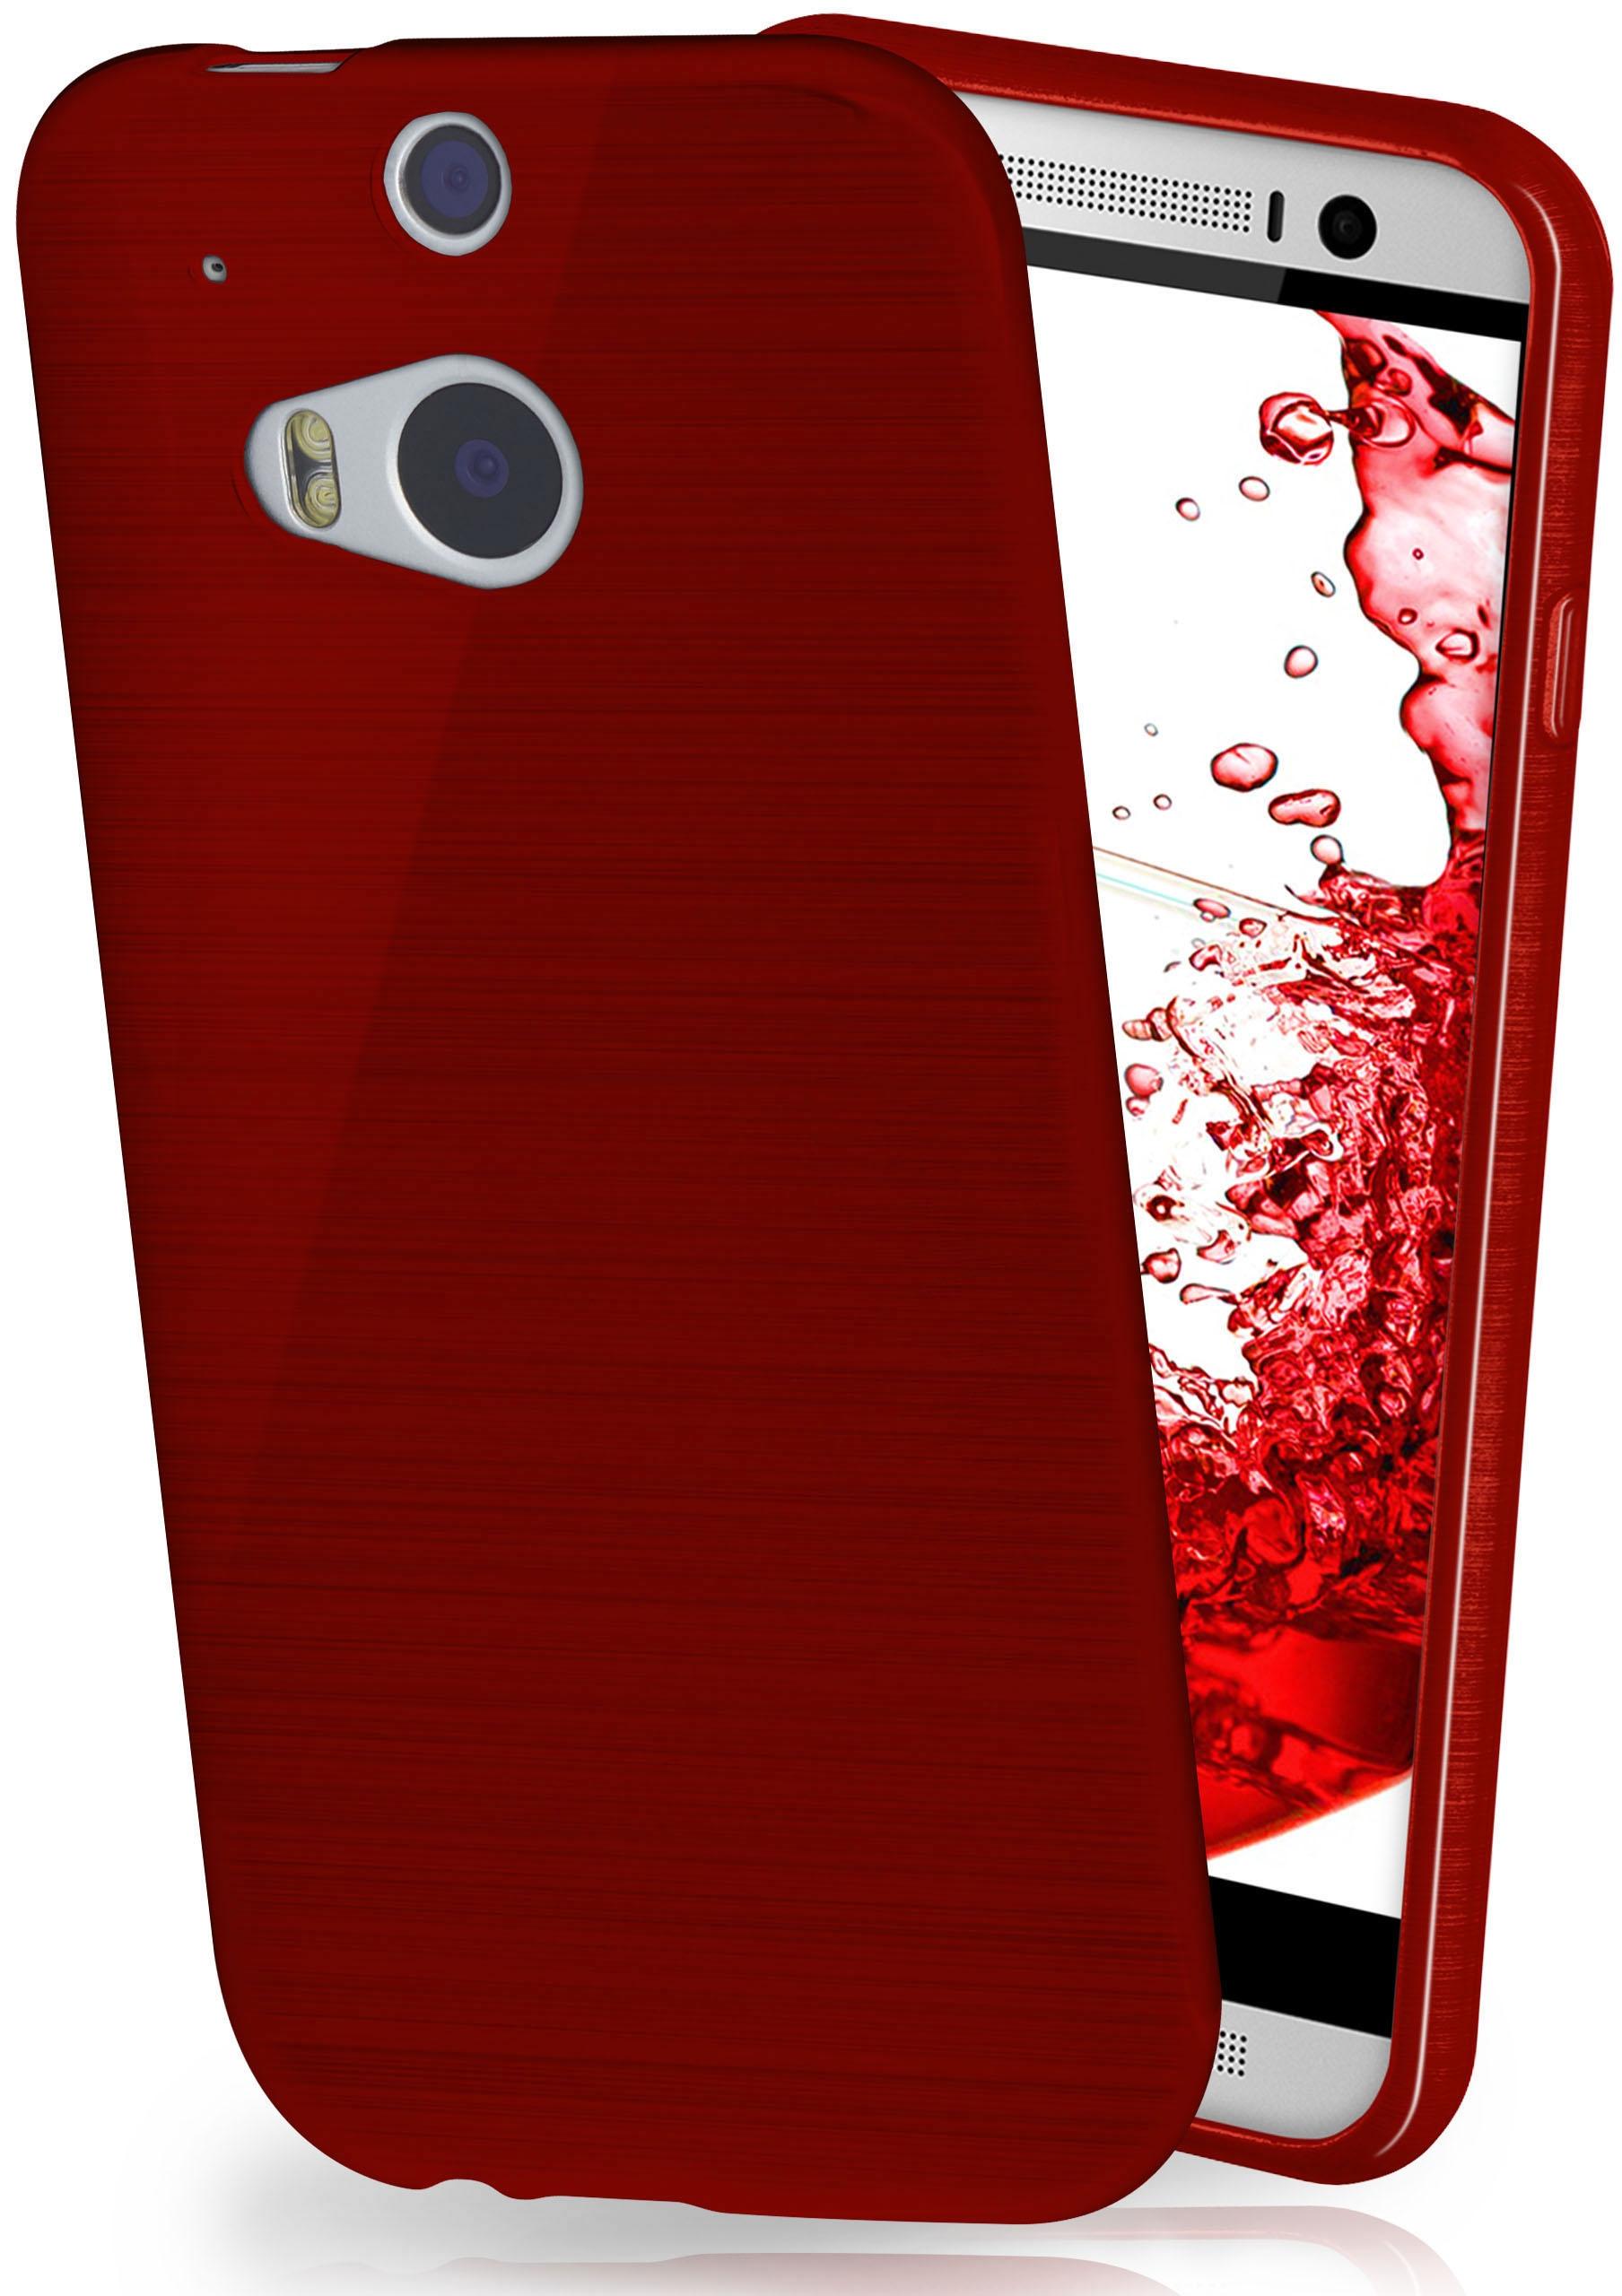 One M8s, Brushed HTC, Backcover, Crimson-Red M8 Case, / MOEX